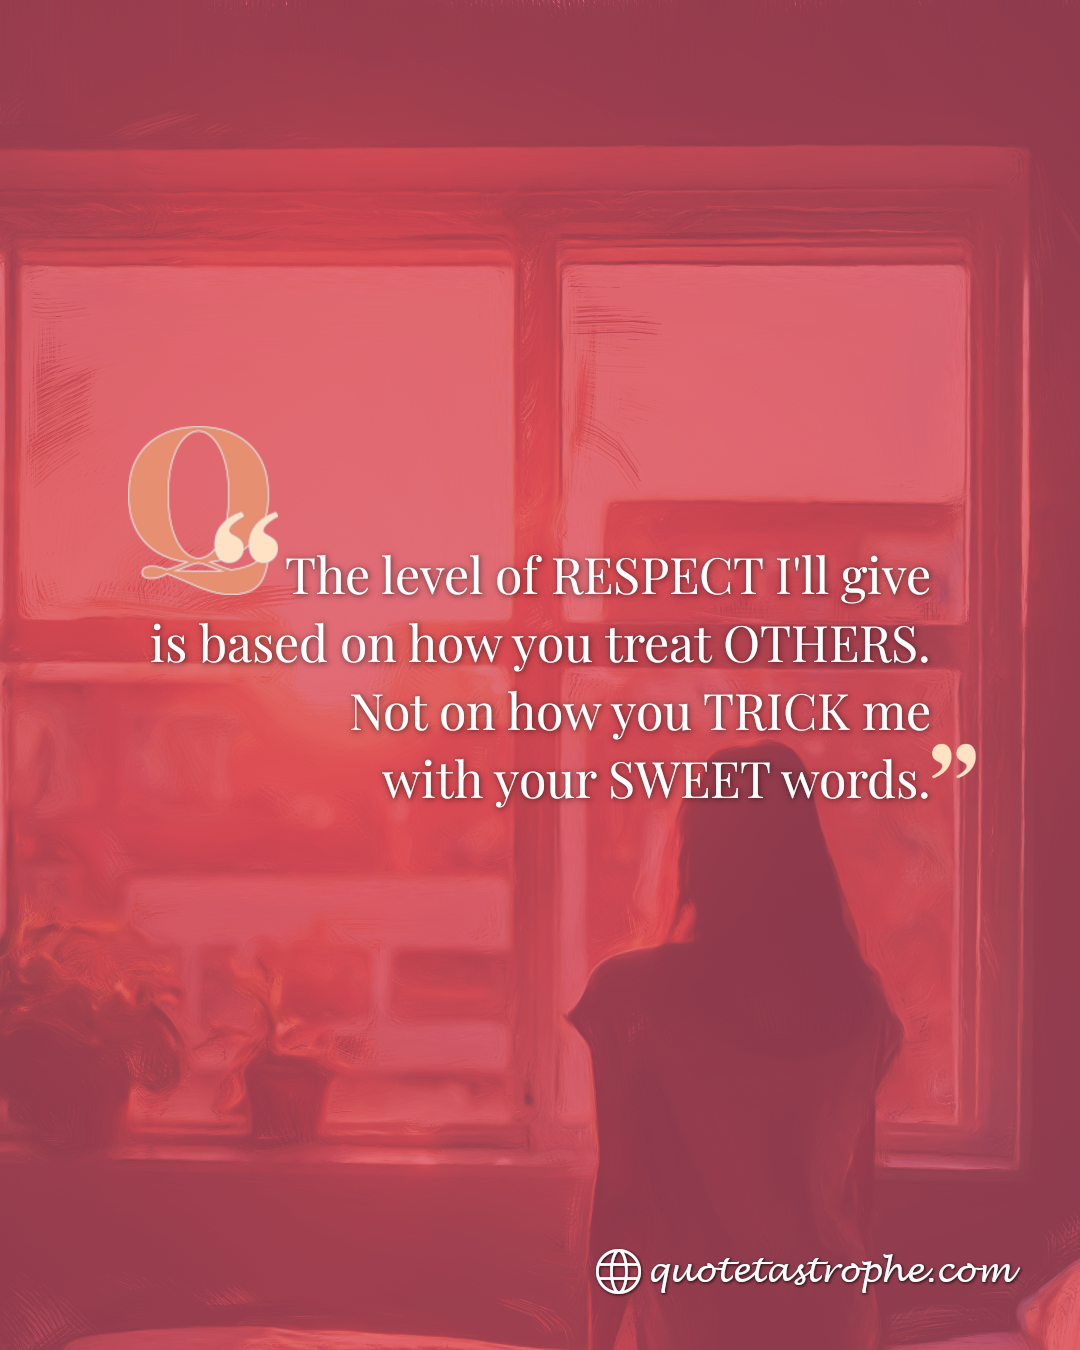 The Level of Respect I'll Give is not Based on Sweet Words